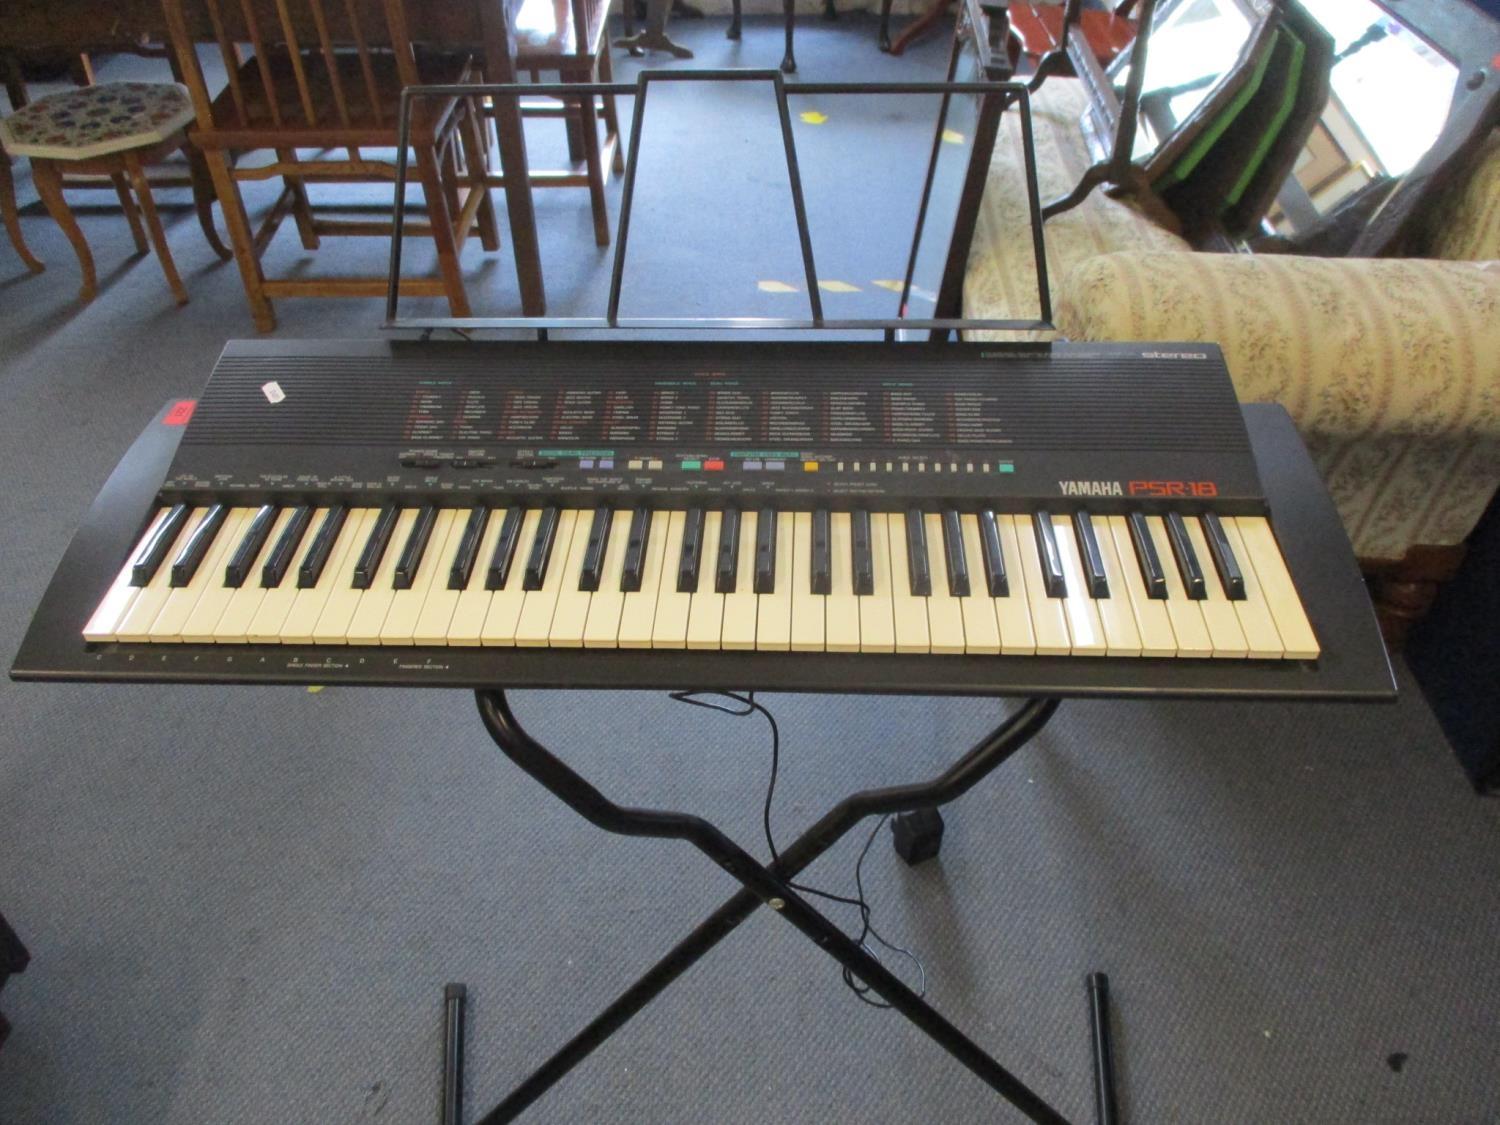 A late 20th century Yamaha keyboard and stand and two other keyboards